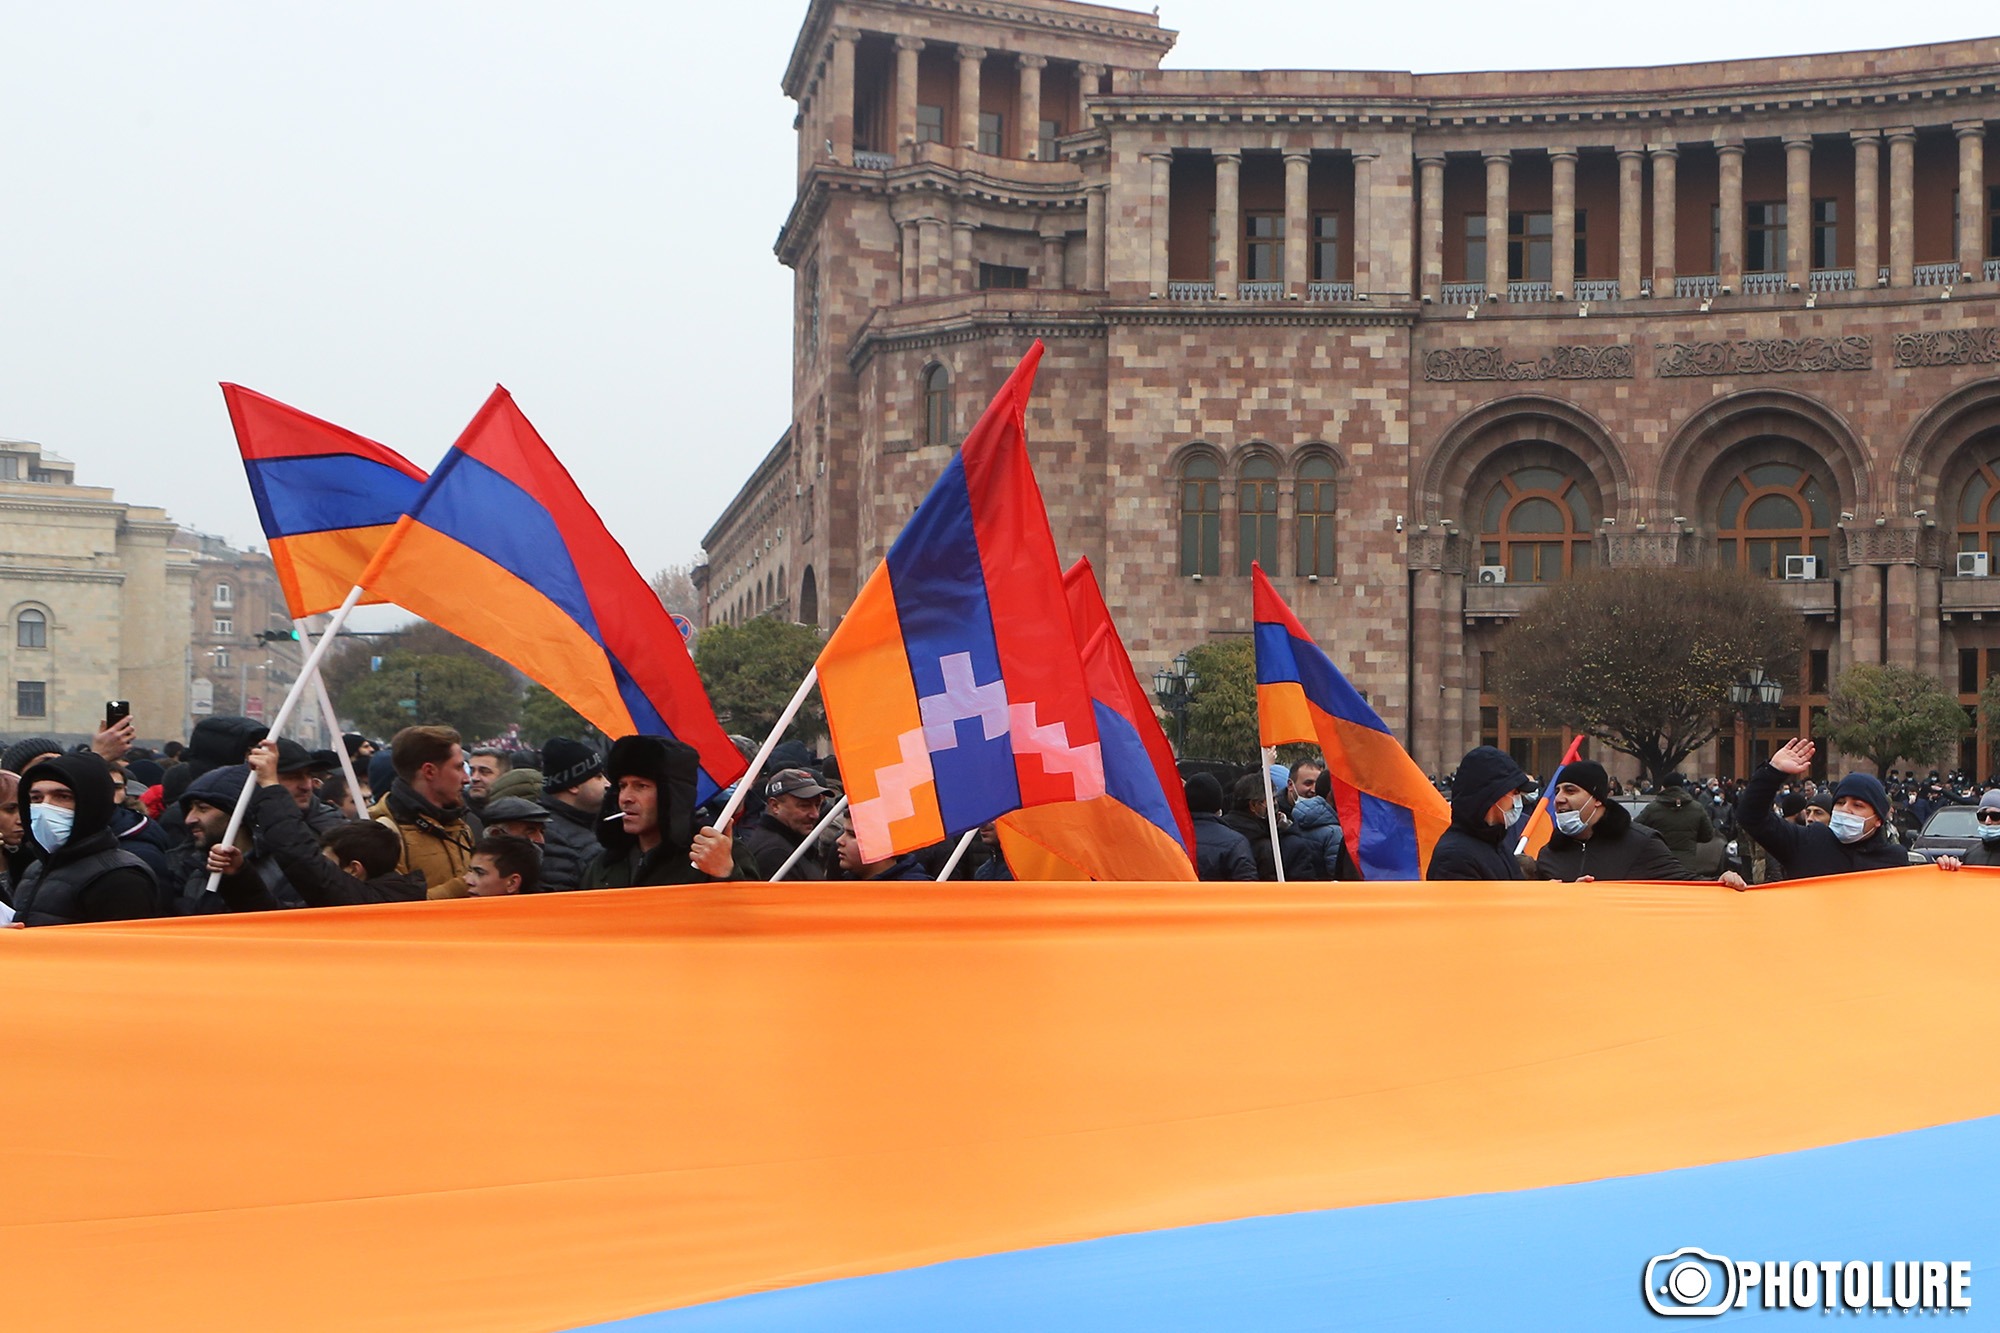 Most Armenians think country heading in wrong direction, new poll says